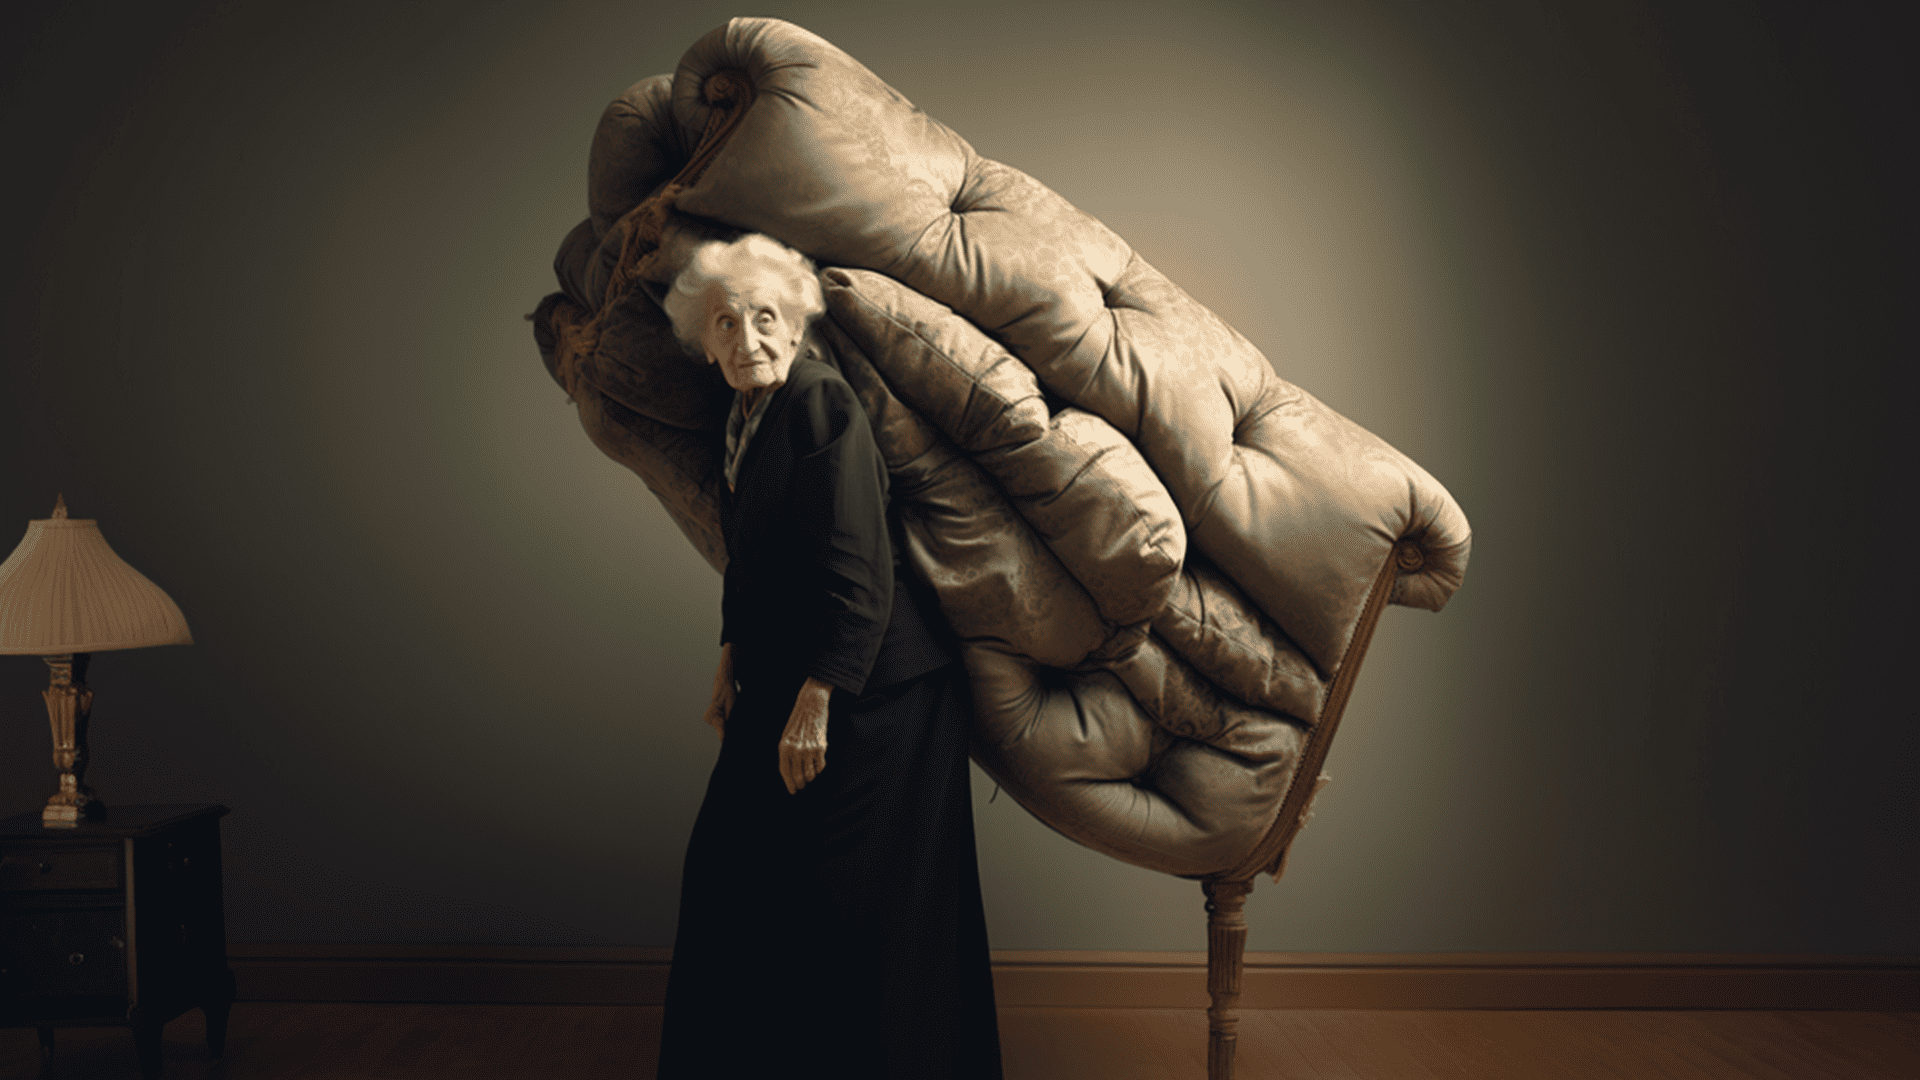 An old woman carrying around a figurative couch on her back to depict that she carries back pain constantly because of her couch